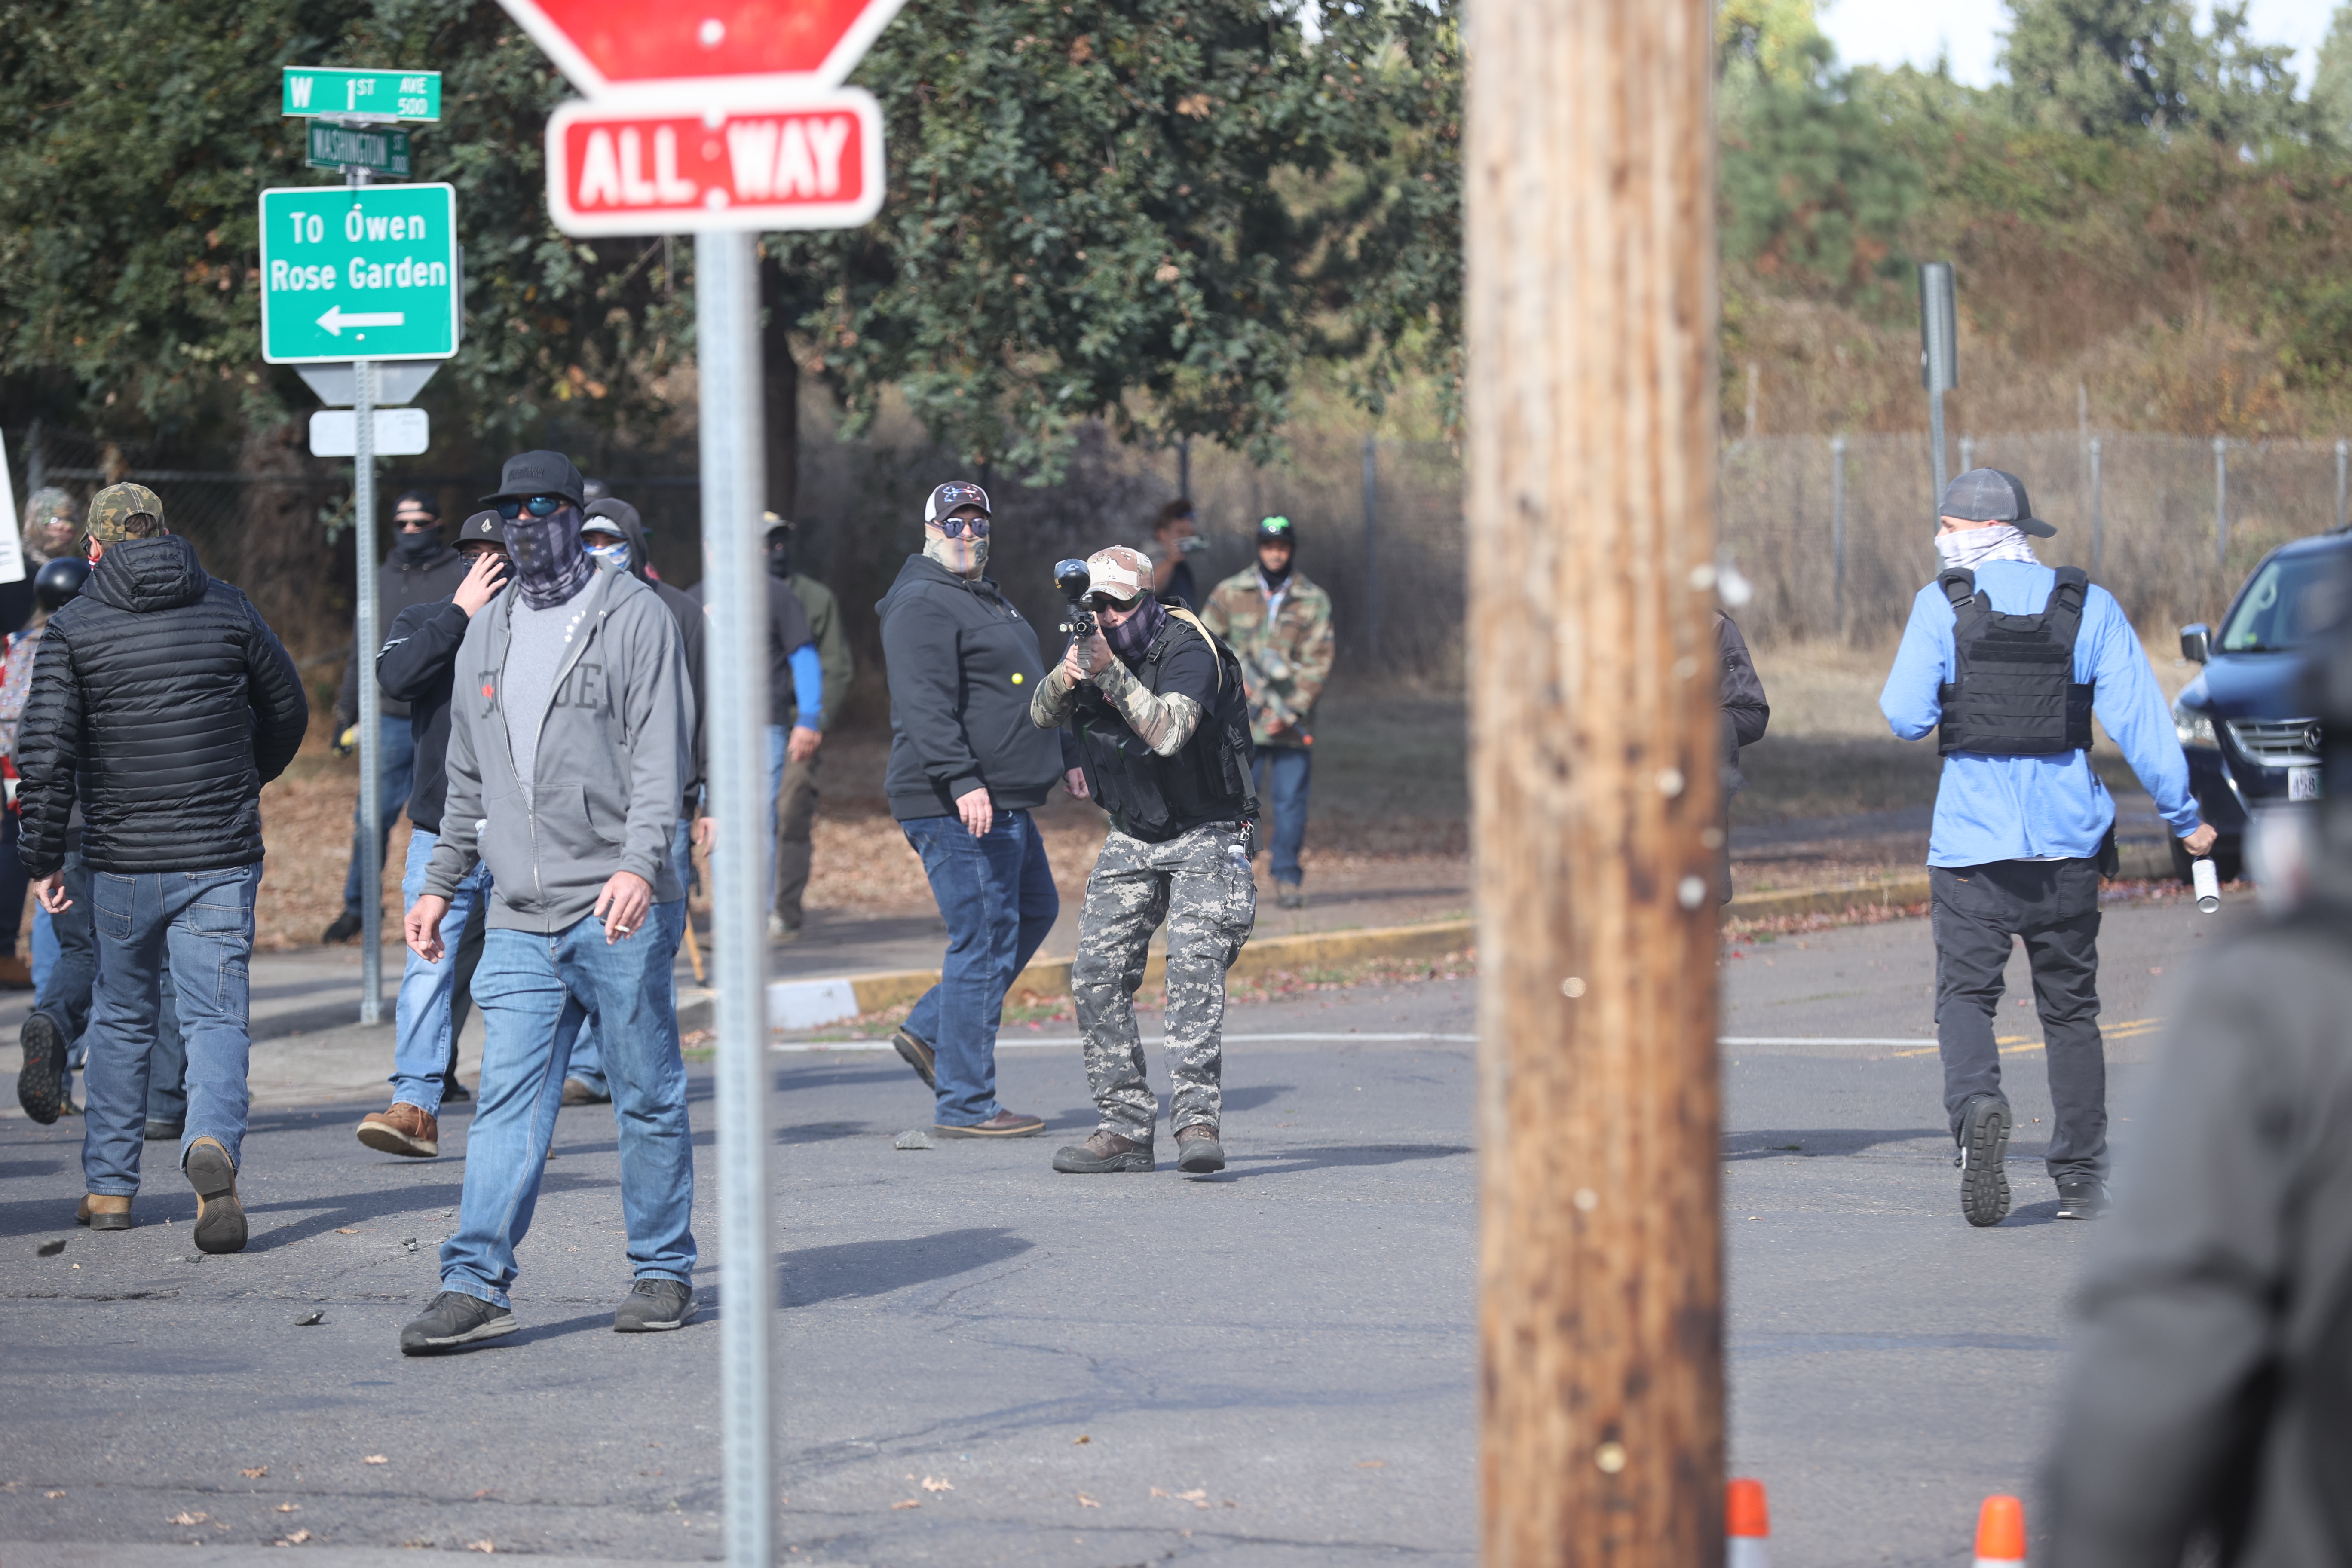 A color photograph looking past a blurry red stop sign and wooden electrical pole. Beyond the signs are men, with their faces covered, retreating on the 1st Ave. To the right of the wooden pole is the blue-shirted Mustin walking away. Directly in the middle of the shot is Jonathan Donovan pointed his paintball gun directly at the camera this photo is taken from. Around him and to the left are another dozen or so protesters leaving.